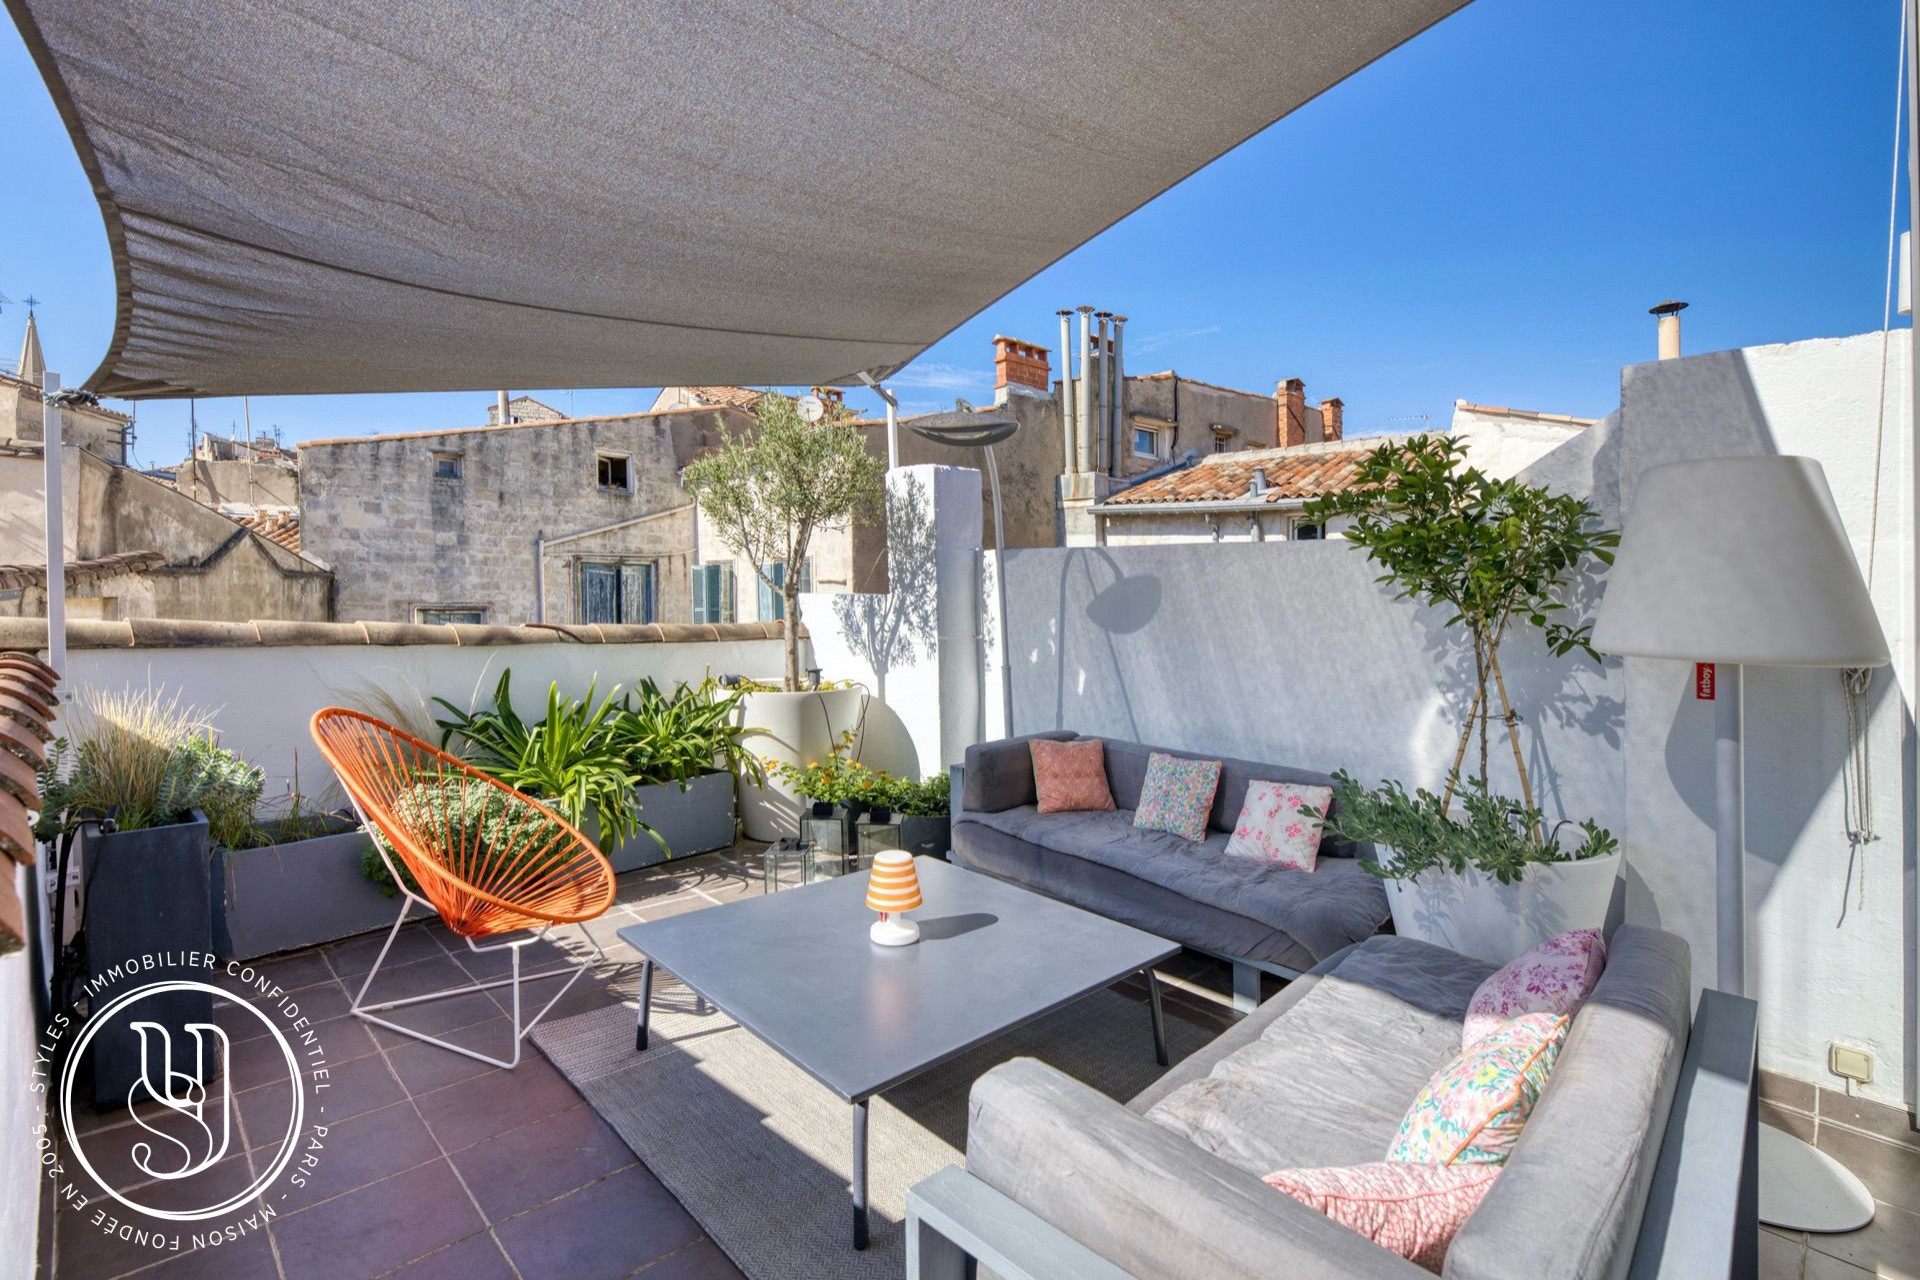 Montpellier - Sold by S T Y L E S, Ecusson, a flat with terraces... - image 2